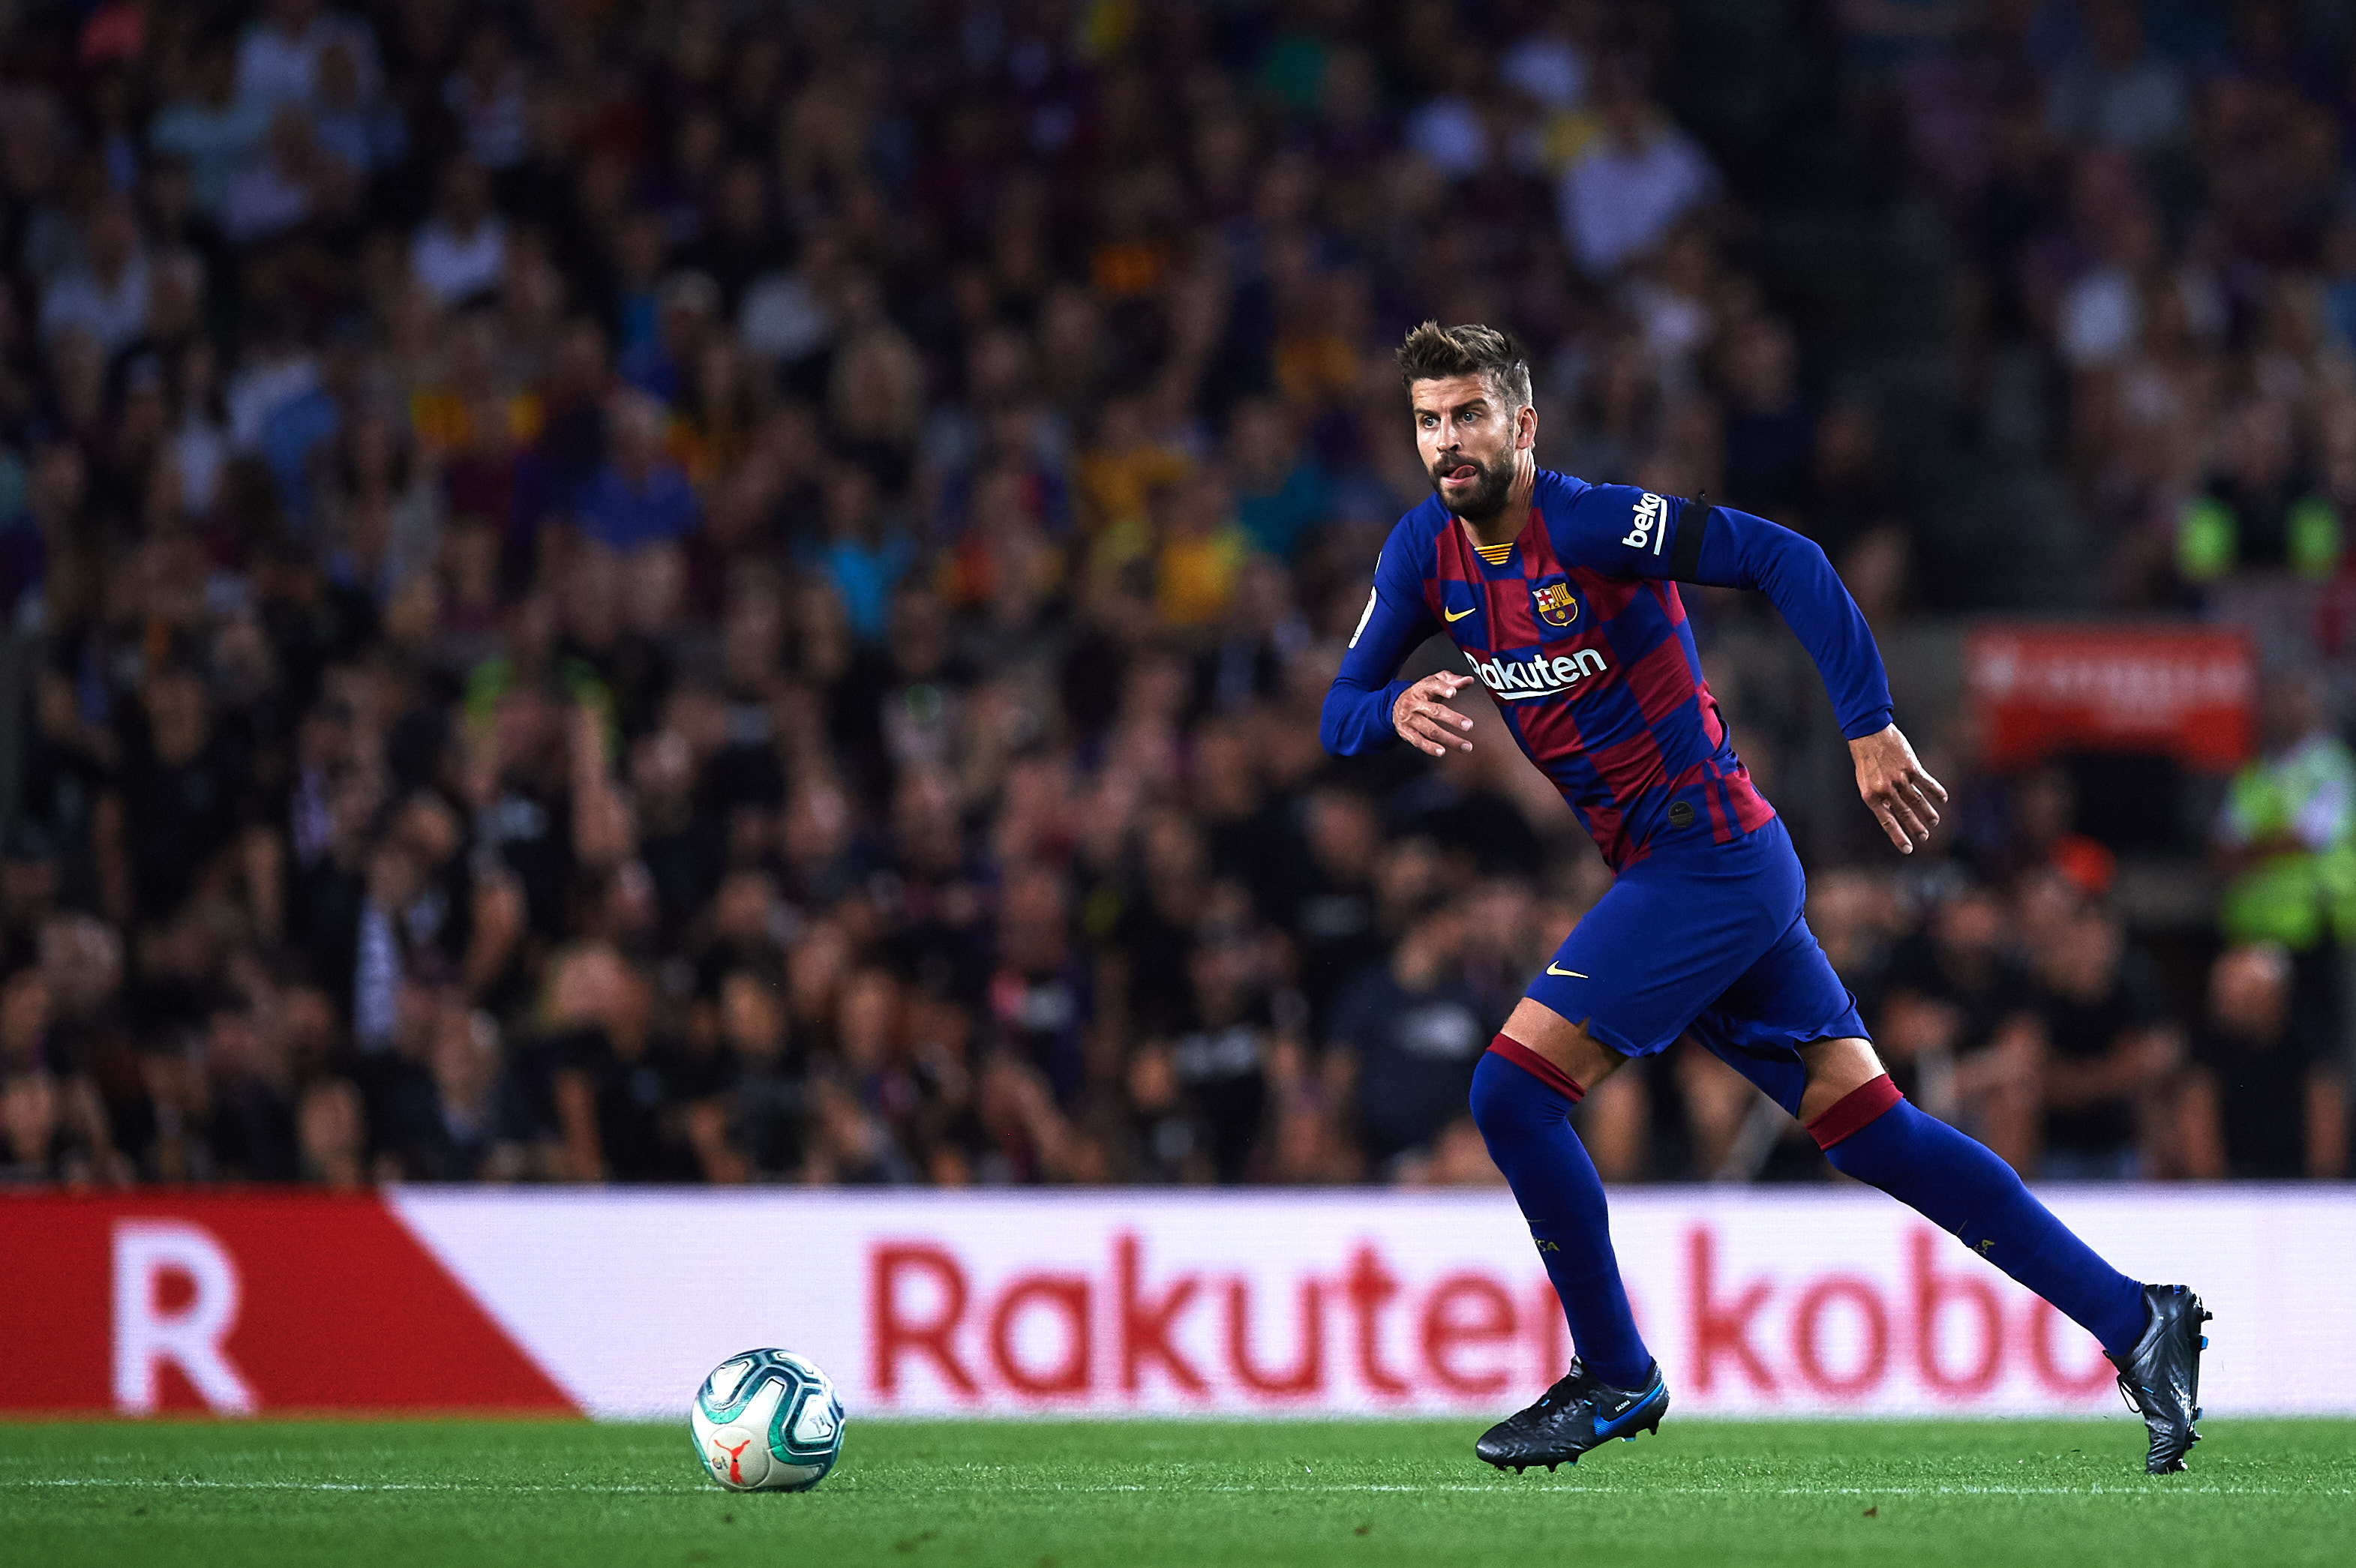 BARCELONA, SPAIN - SEPTEMBER 14: Gerard Pique of FC Barcelona runs with the ball during the La Liga match between FC Barcelona and Valencia CF at Camp Nou on September 14, 2019 in Barcelona, Spain. (Photo by Alex Caparros/Getty Images)